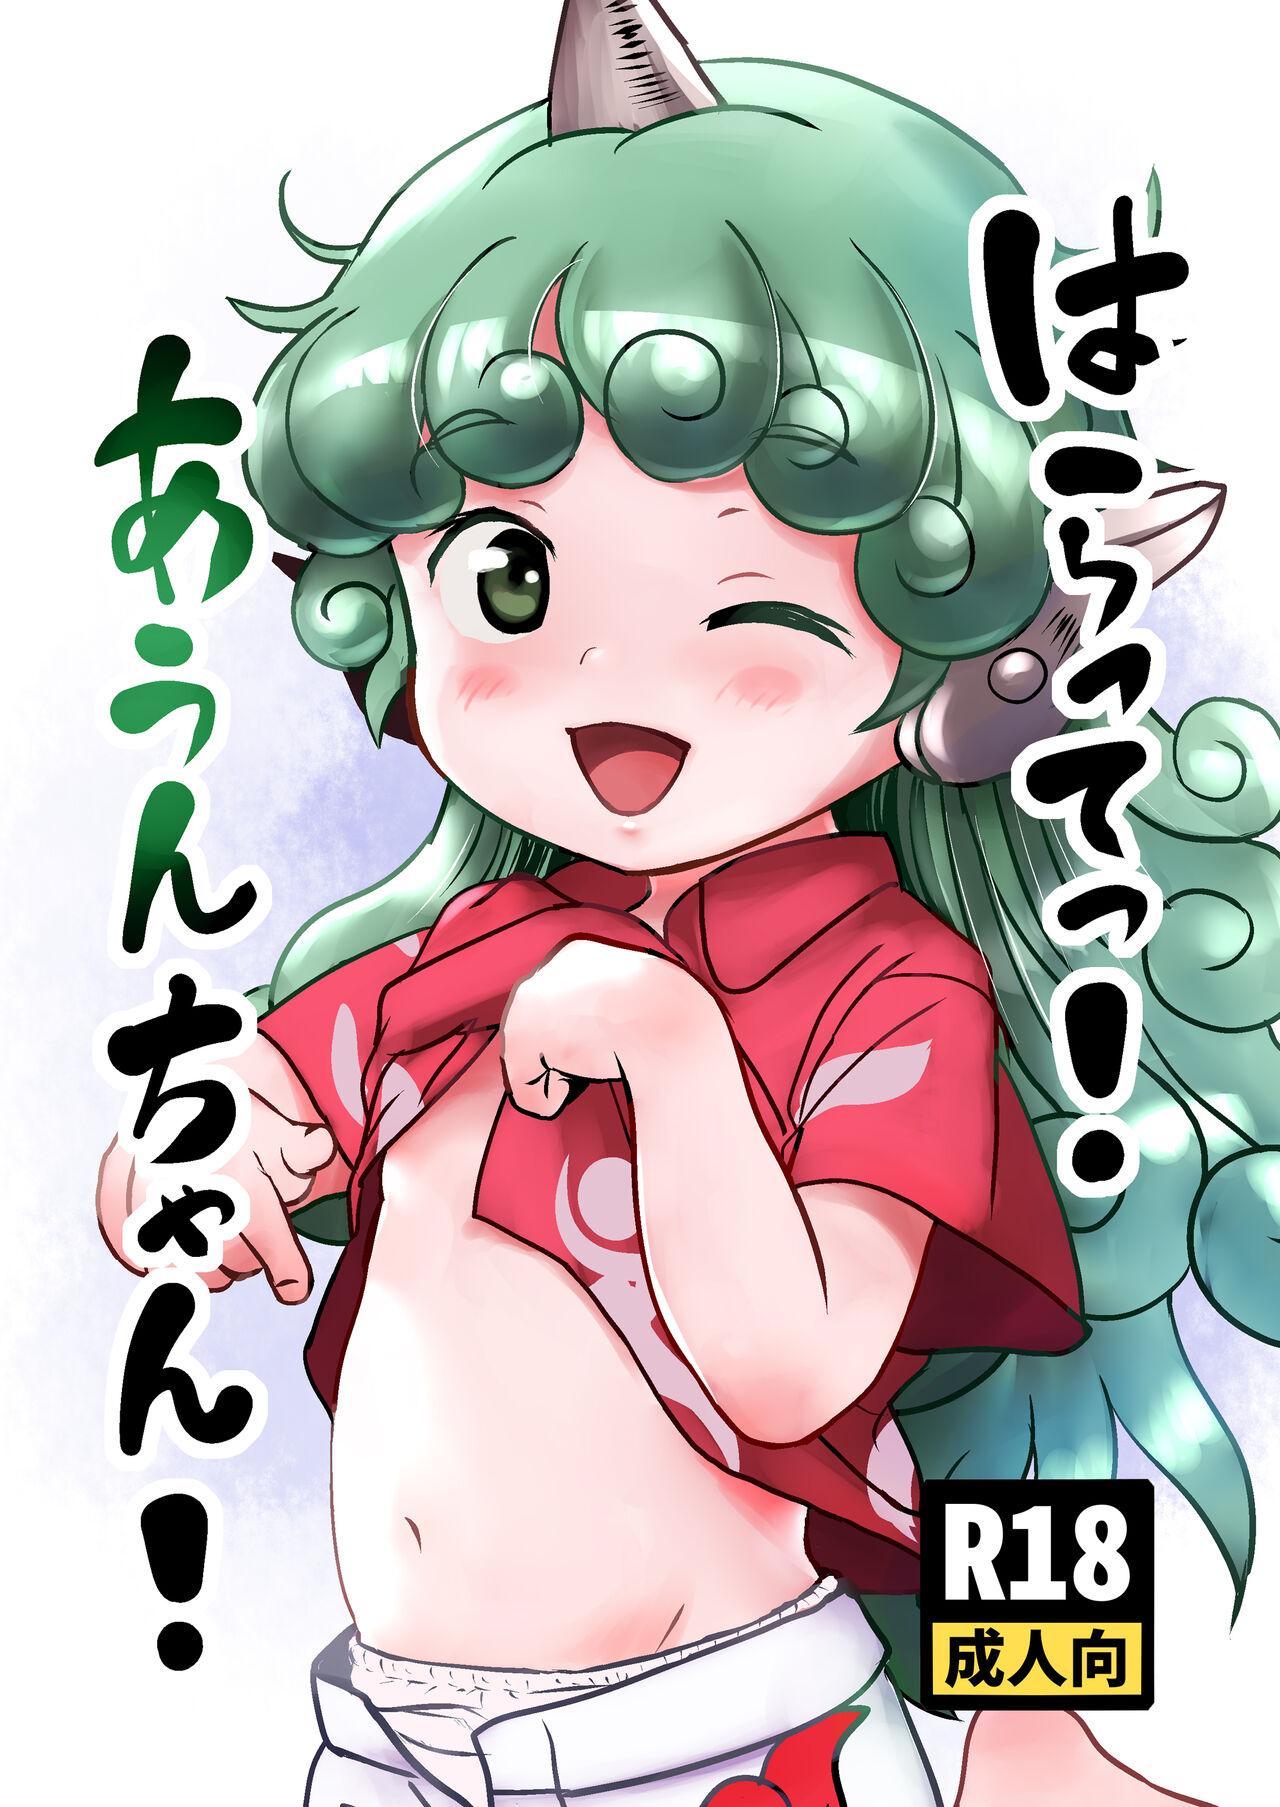 Tit Haratte! Aun-chan! - Touhou project Leaked - Page 1